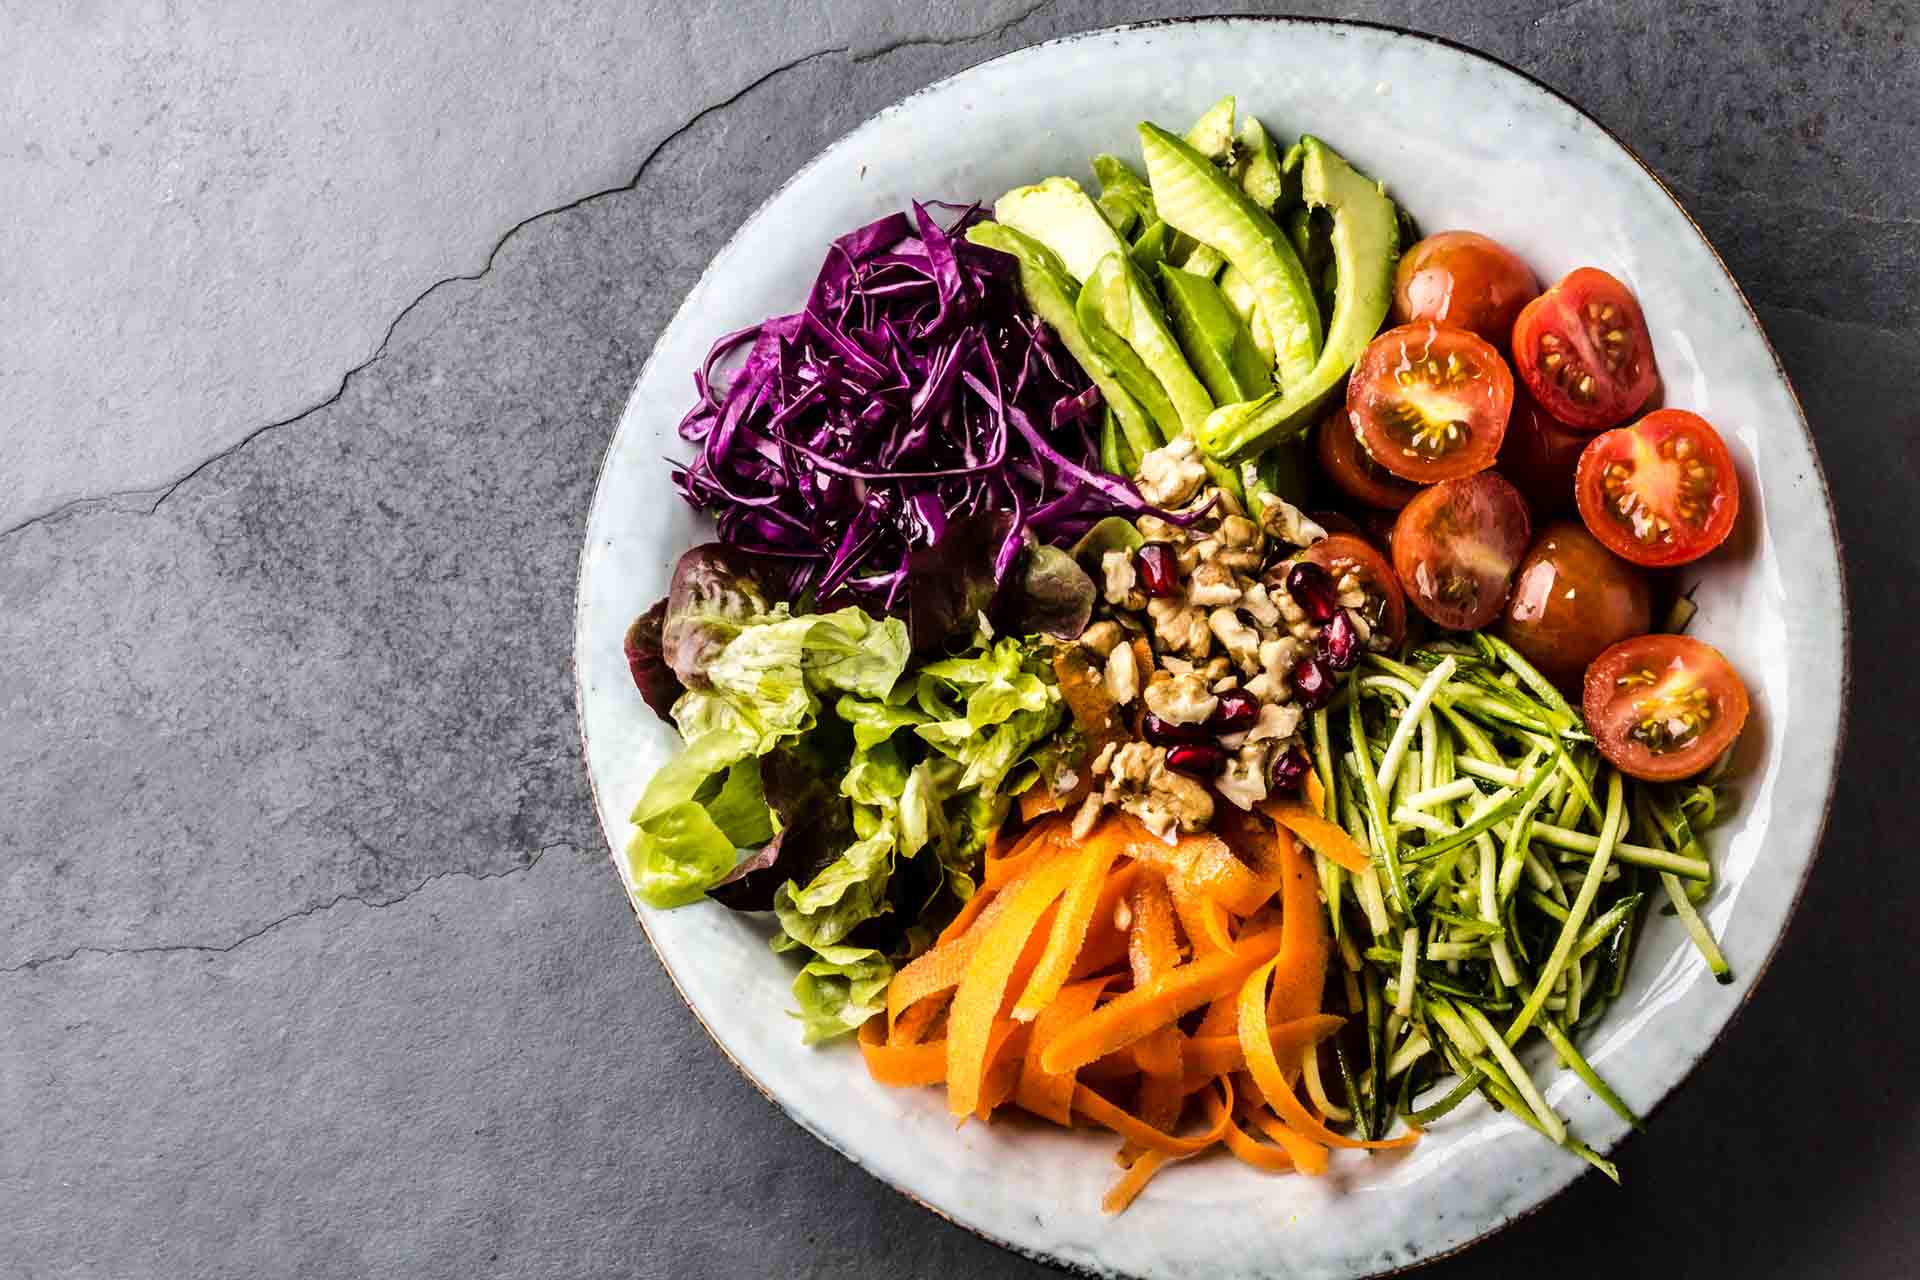 Vegan buddha bowl. Bowl with fresh raw vegetables - cabbage, carrot, zucchini, lettuce, watercress salad, tomatoes cherry and avocado, nuts and pomegranate on slate background